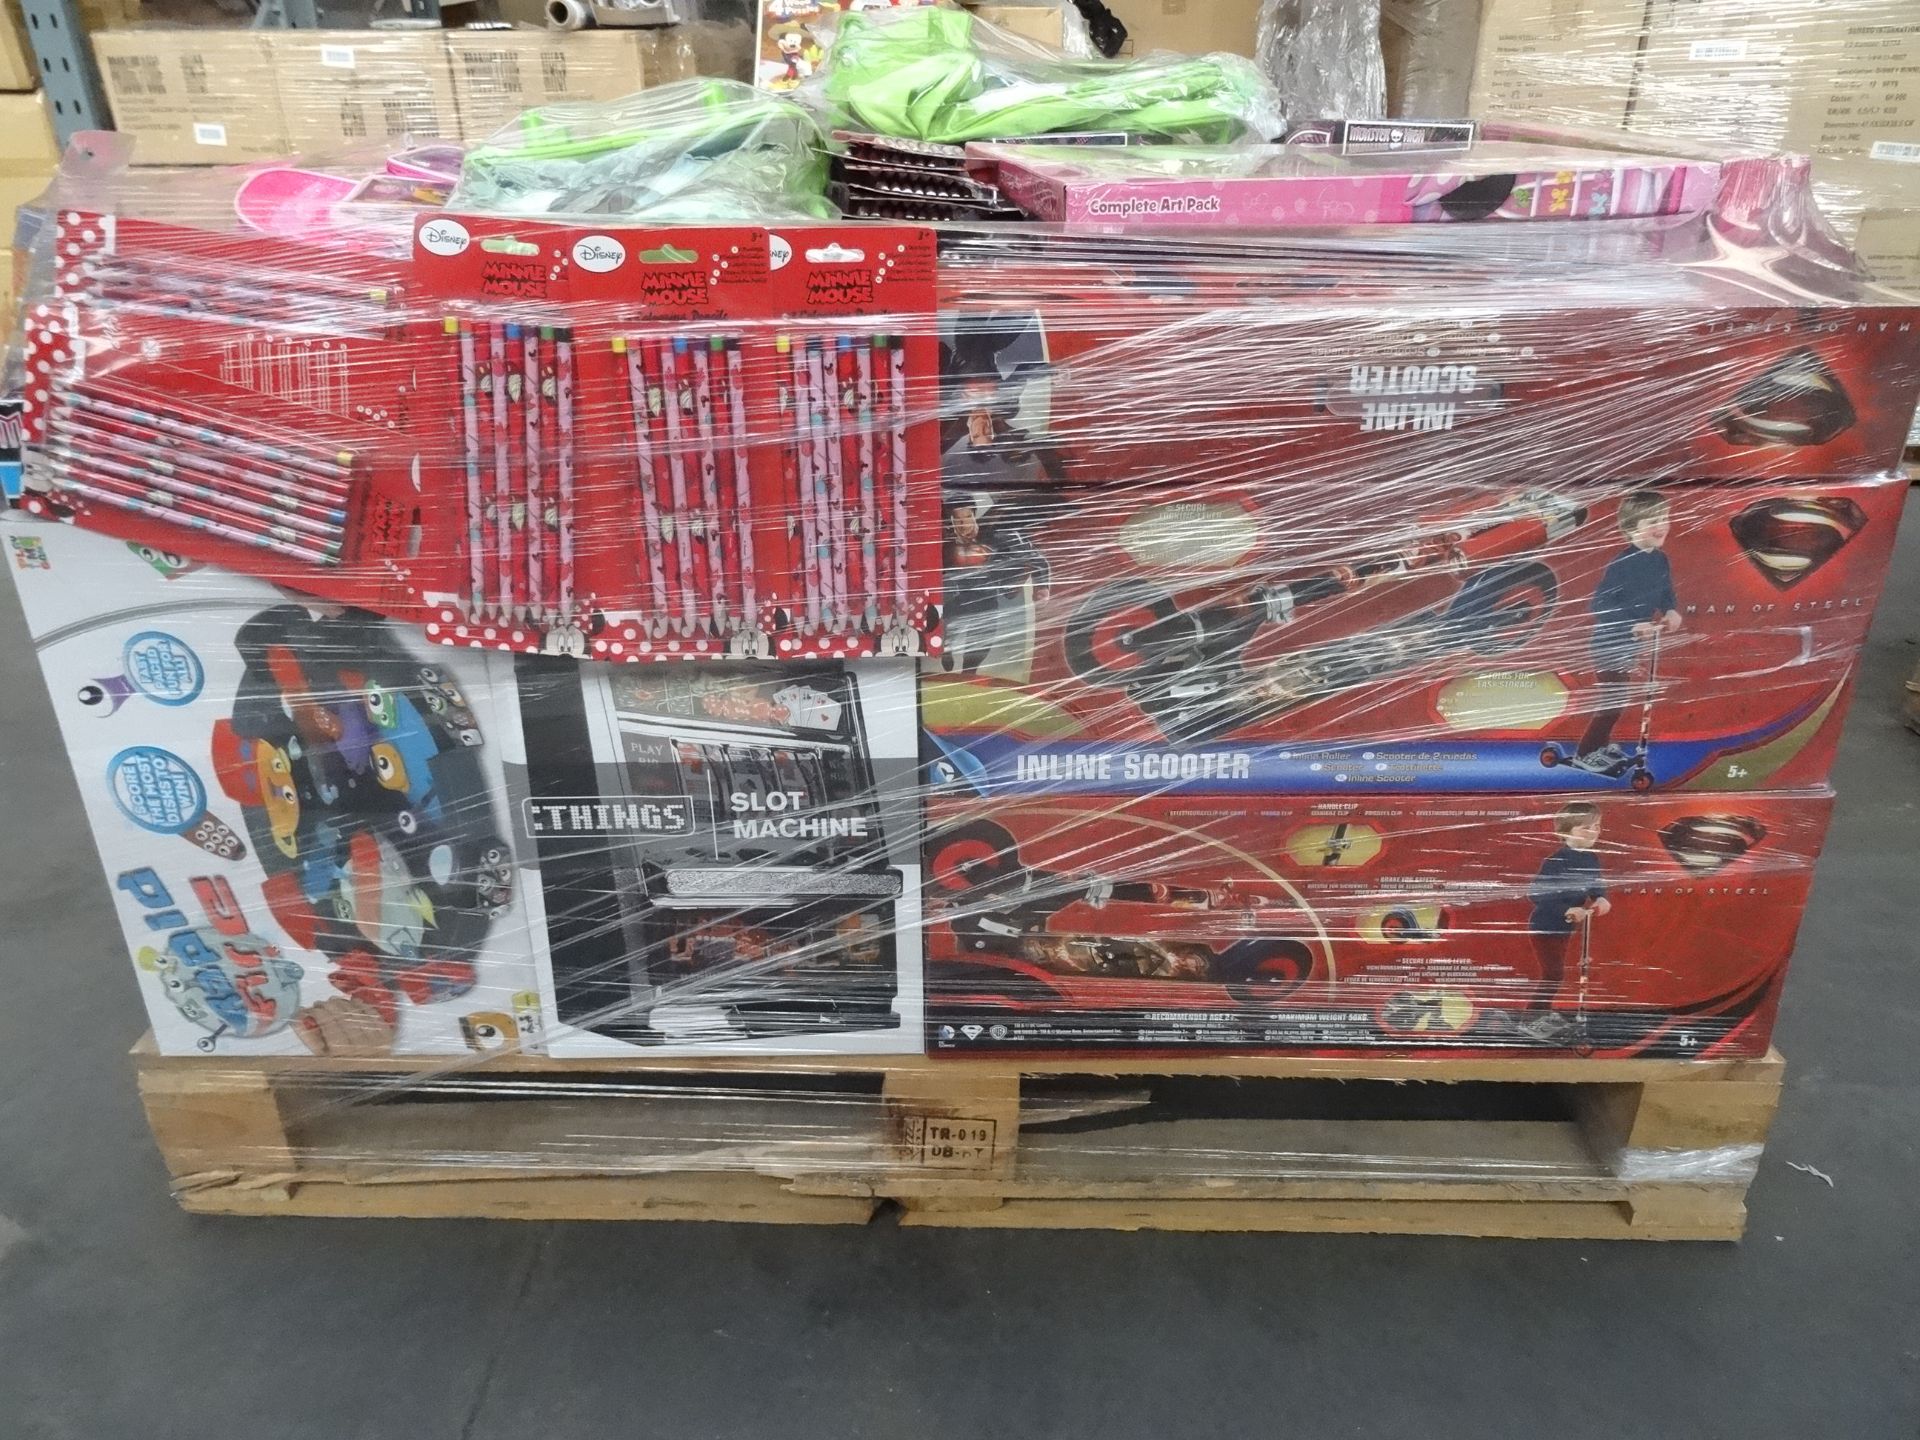 LARGE PALLET (2) TO CONTAIN 272 ITEMS OF BRAND NEW TOYS & GAMES. TO INCLUDE:
5 x Superman